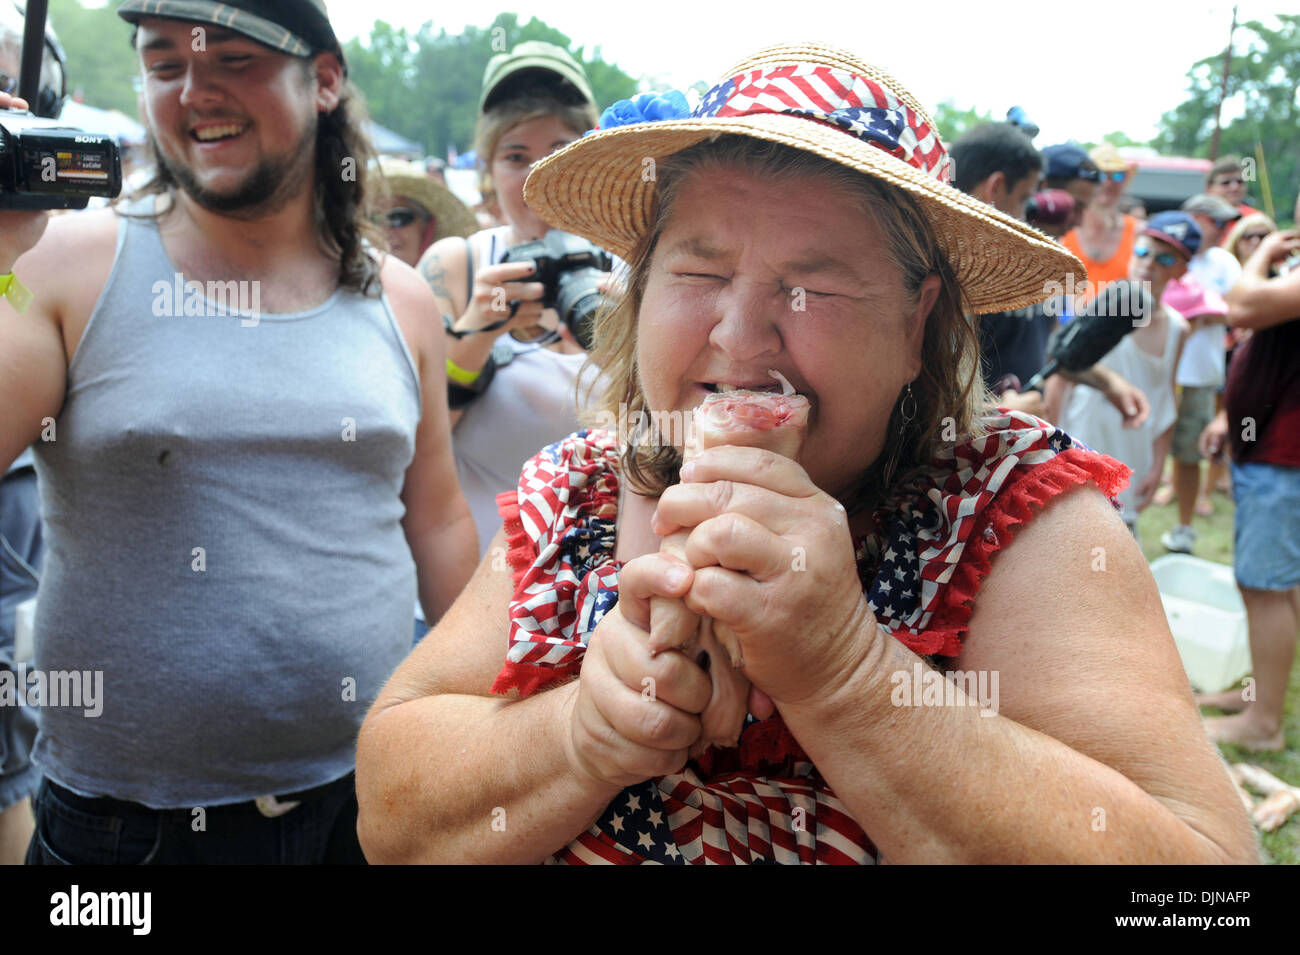 Mar 11, 2008 - East Dublin, Georgia, USA - 'Redneck Grandma' Barbara Bailey samples the cuisine in the Bobbing for Pigs Feet event during during the 13th annual Summer Redneck Games at Buckeye Park in East Dublin, Georgia, on Saturday. The annual homage to Southerners, began as a spoof to the 1996 Summer Olympics in Atlanta. Thousands of revelers attend the event whose events inclu Stock Photo